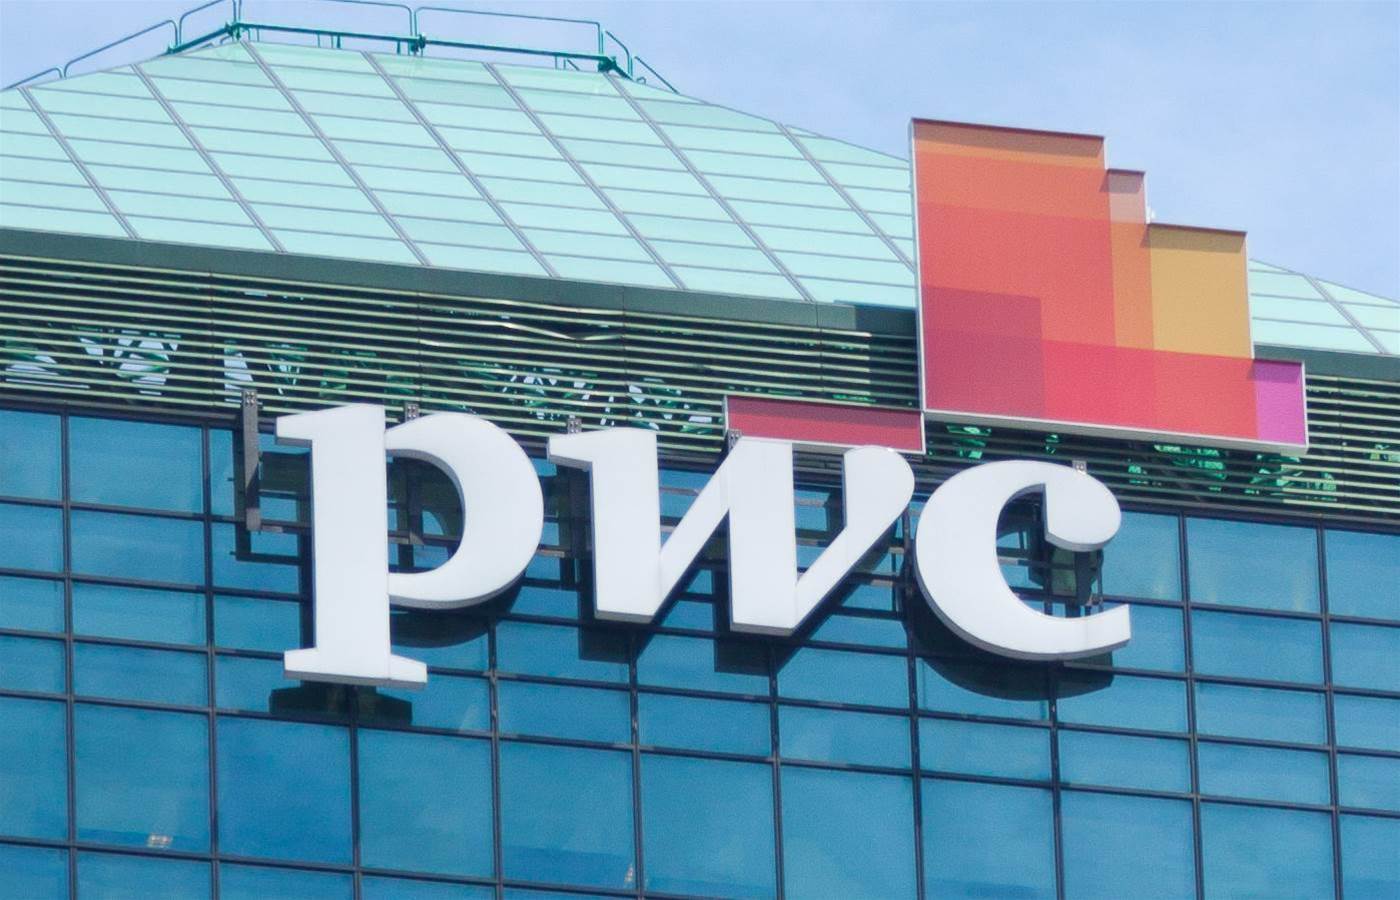 Australia: PricewaterhouseCoopers is suspected of leaking confidential data on a tax reform project